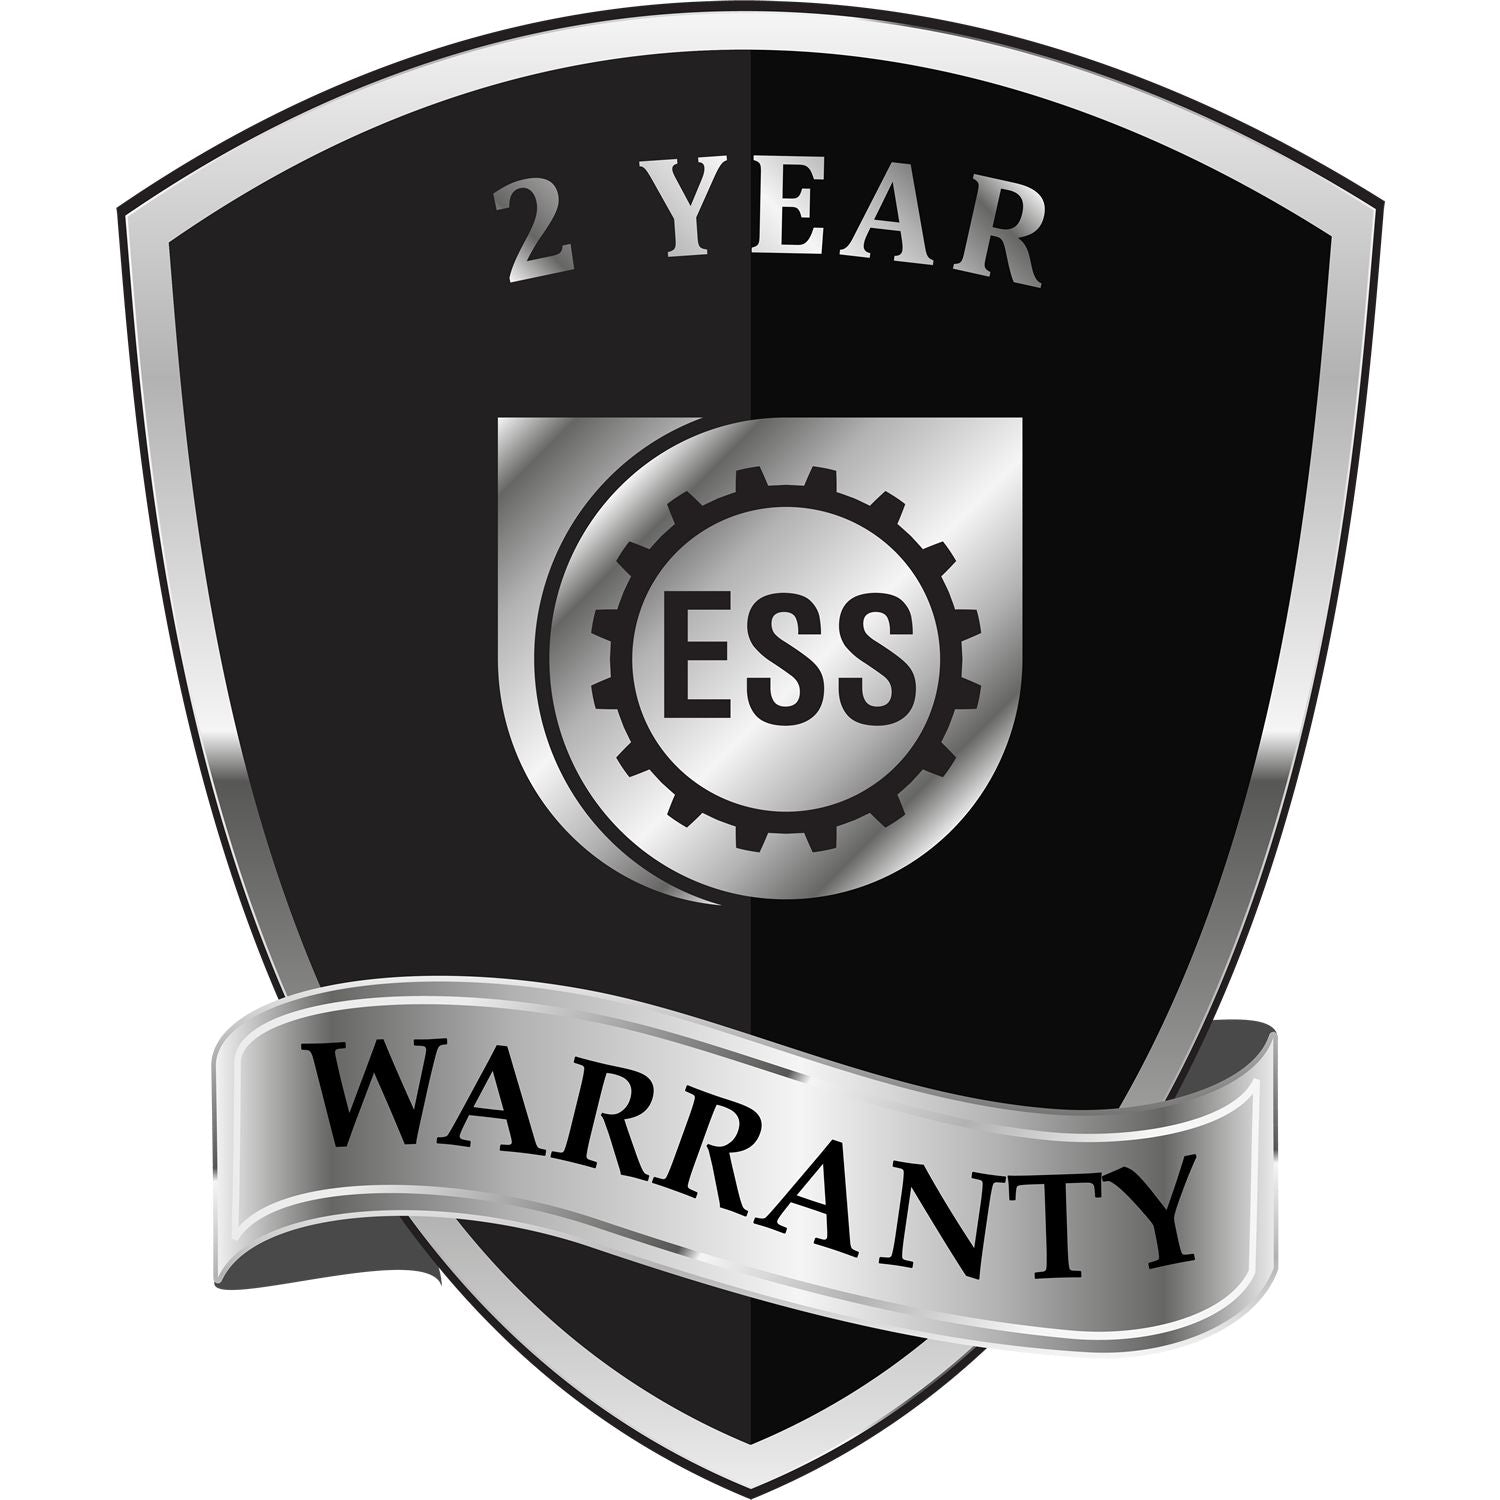 A badge or emblem showing a warranty icon for the Soft Oregon Professional Engineer Seal